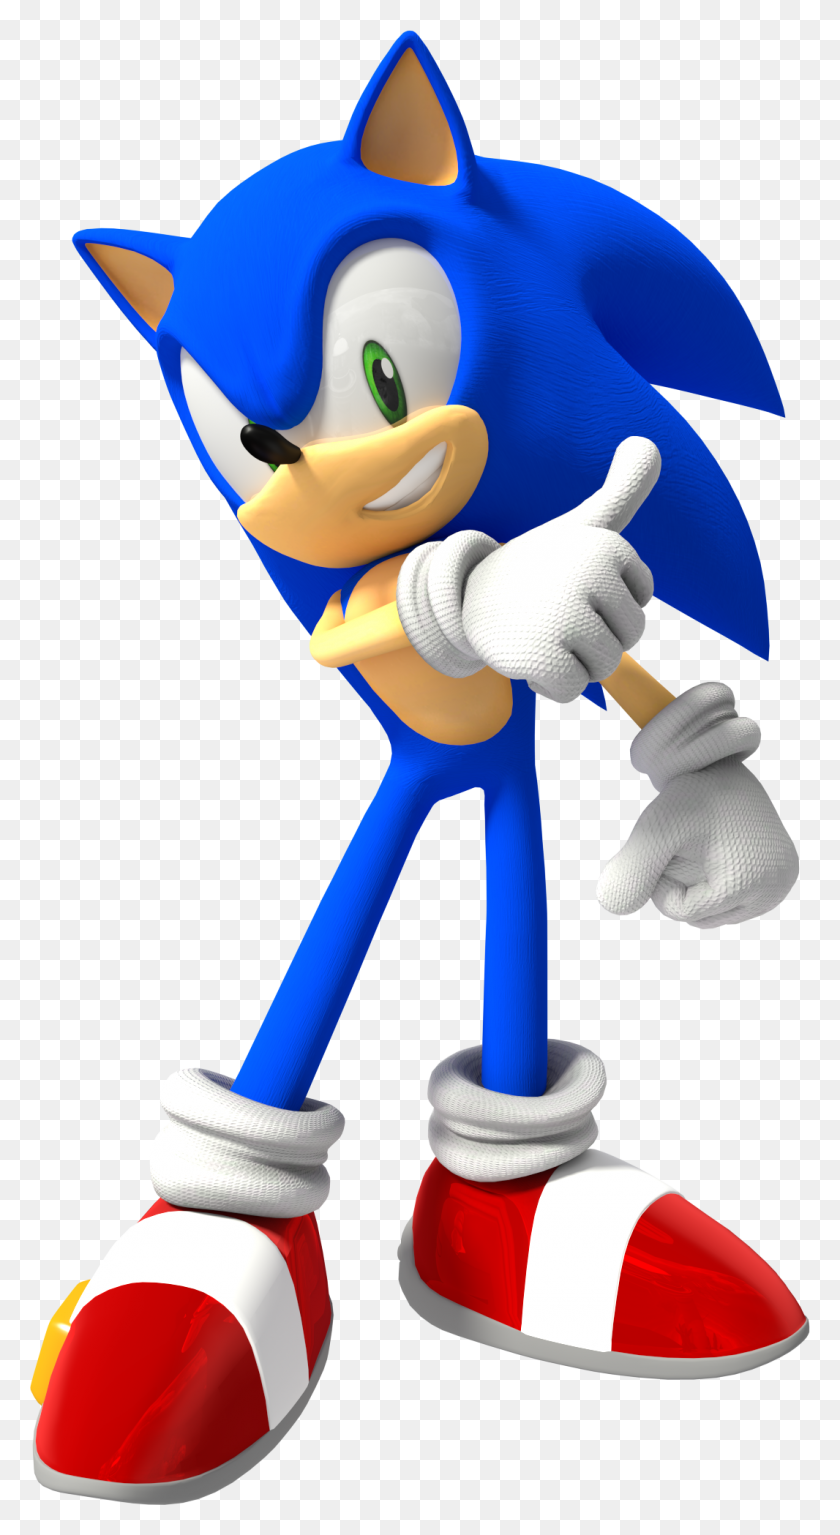 1066x2016 Sonic Hd Png Transparente Sonic Hd Images - Sonic The Hedgehog Png